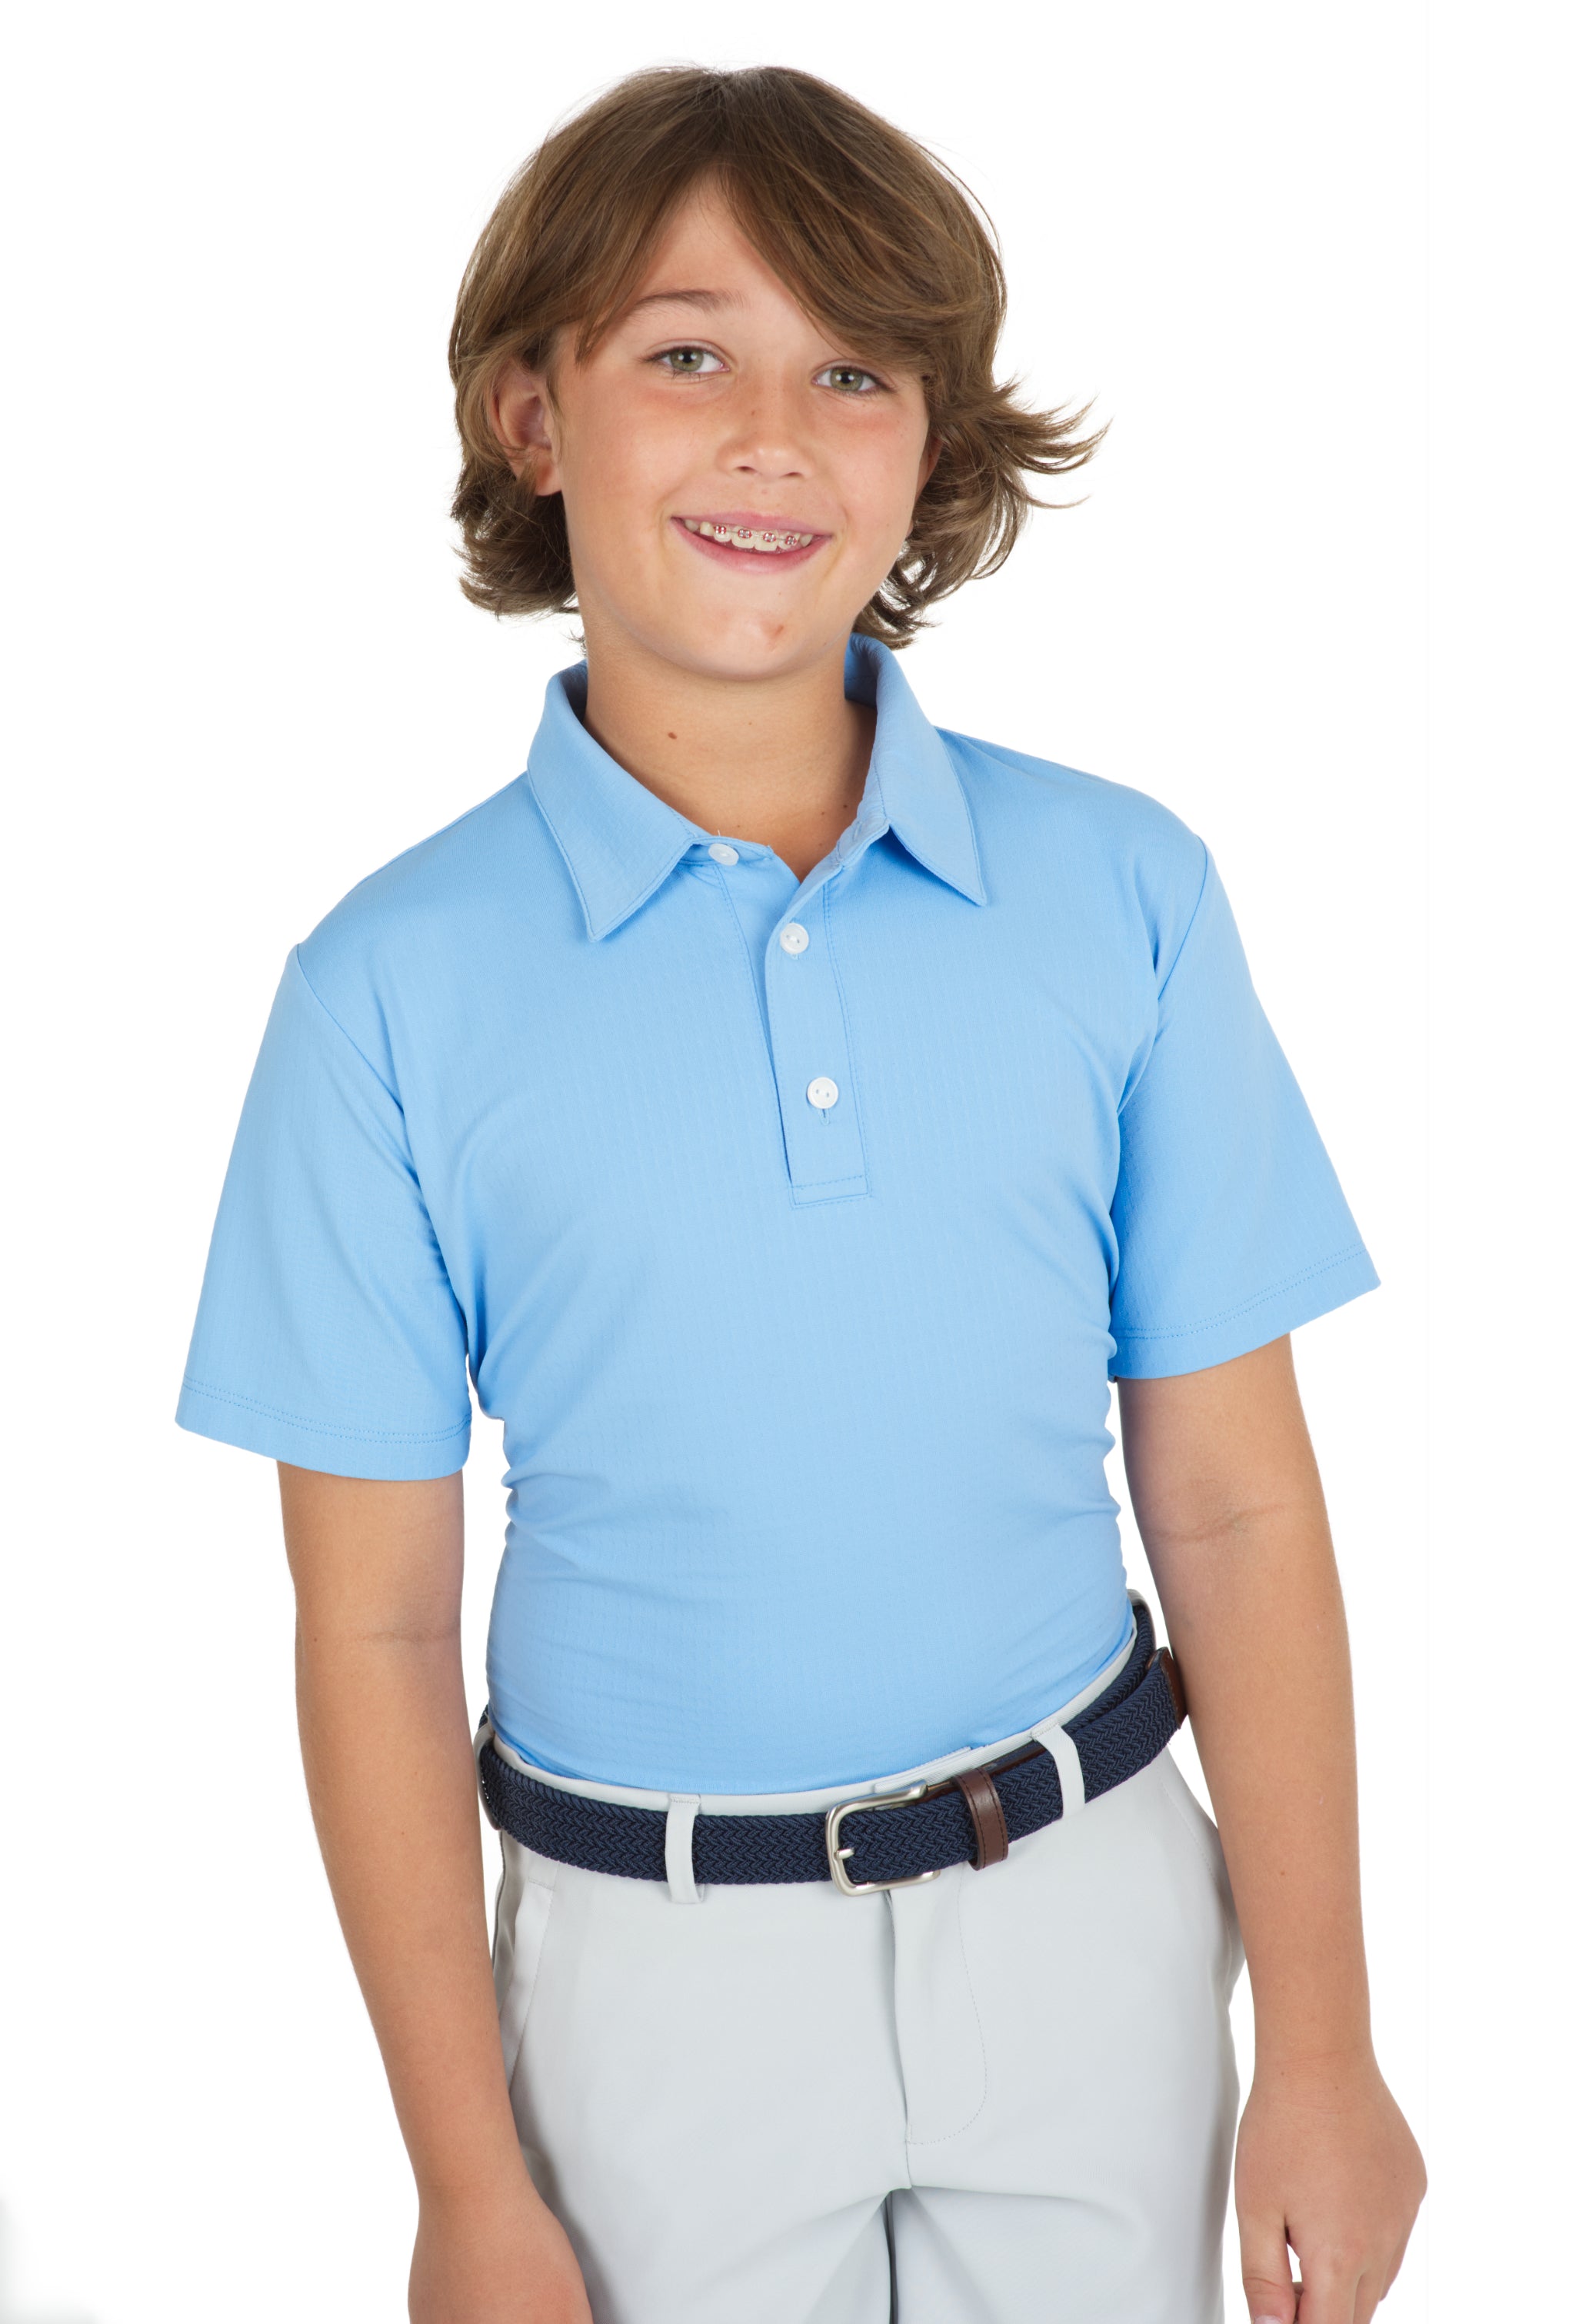 Youth Solid Short Sleeve Polo - 94199B